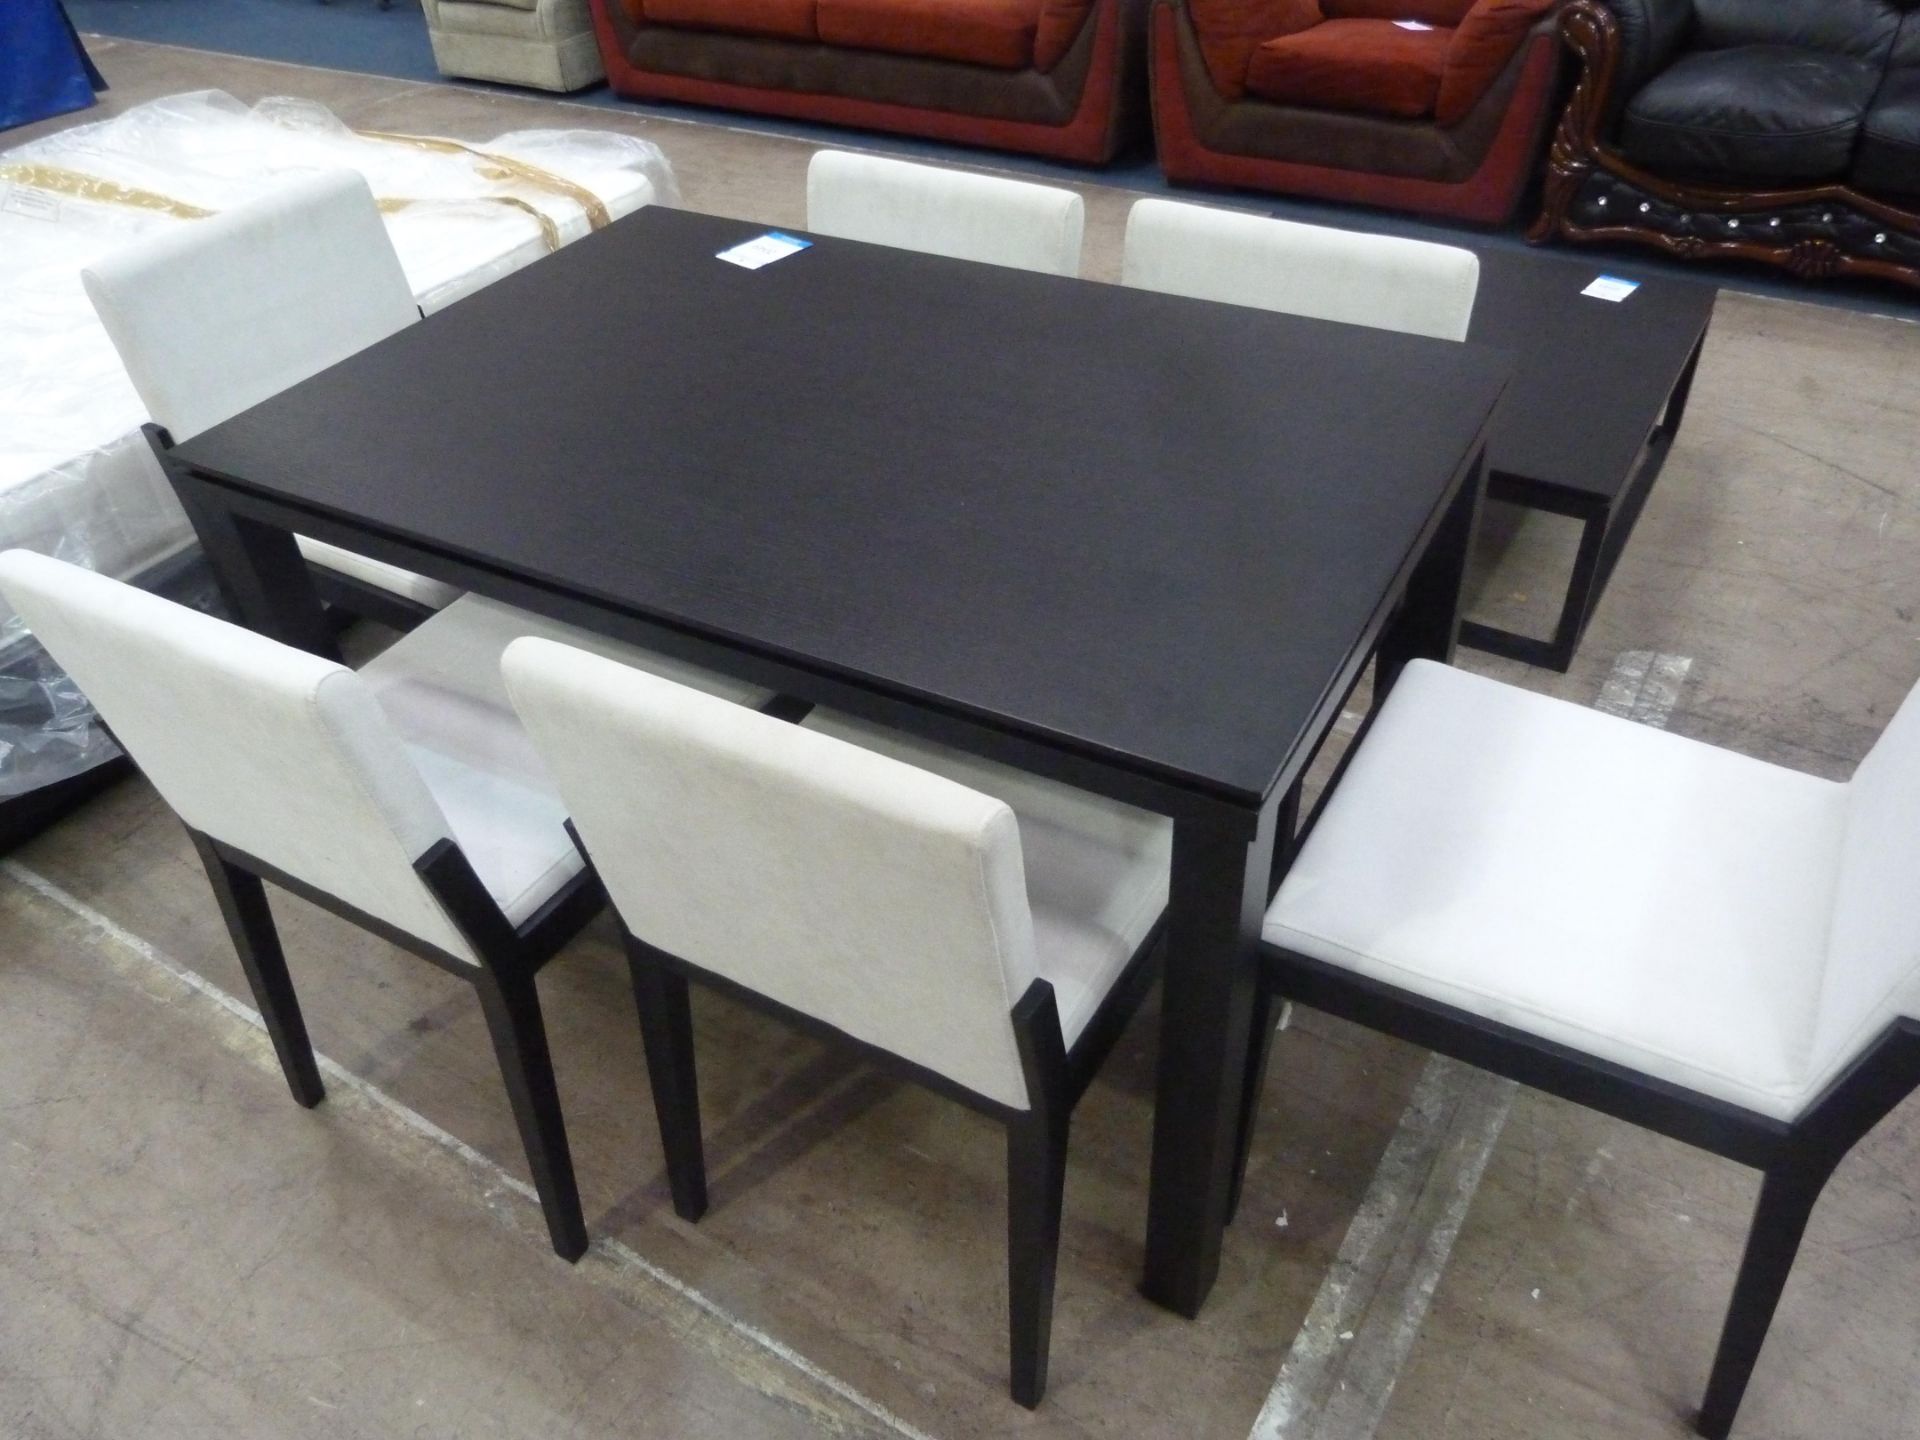 A Dark Dining Table (H75cm, W120cm, D80cm) with Six matching Chairs featuring Cream Upholstered